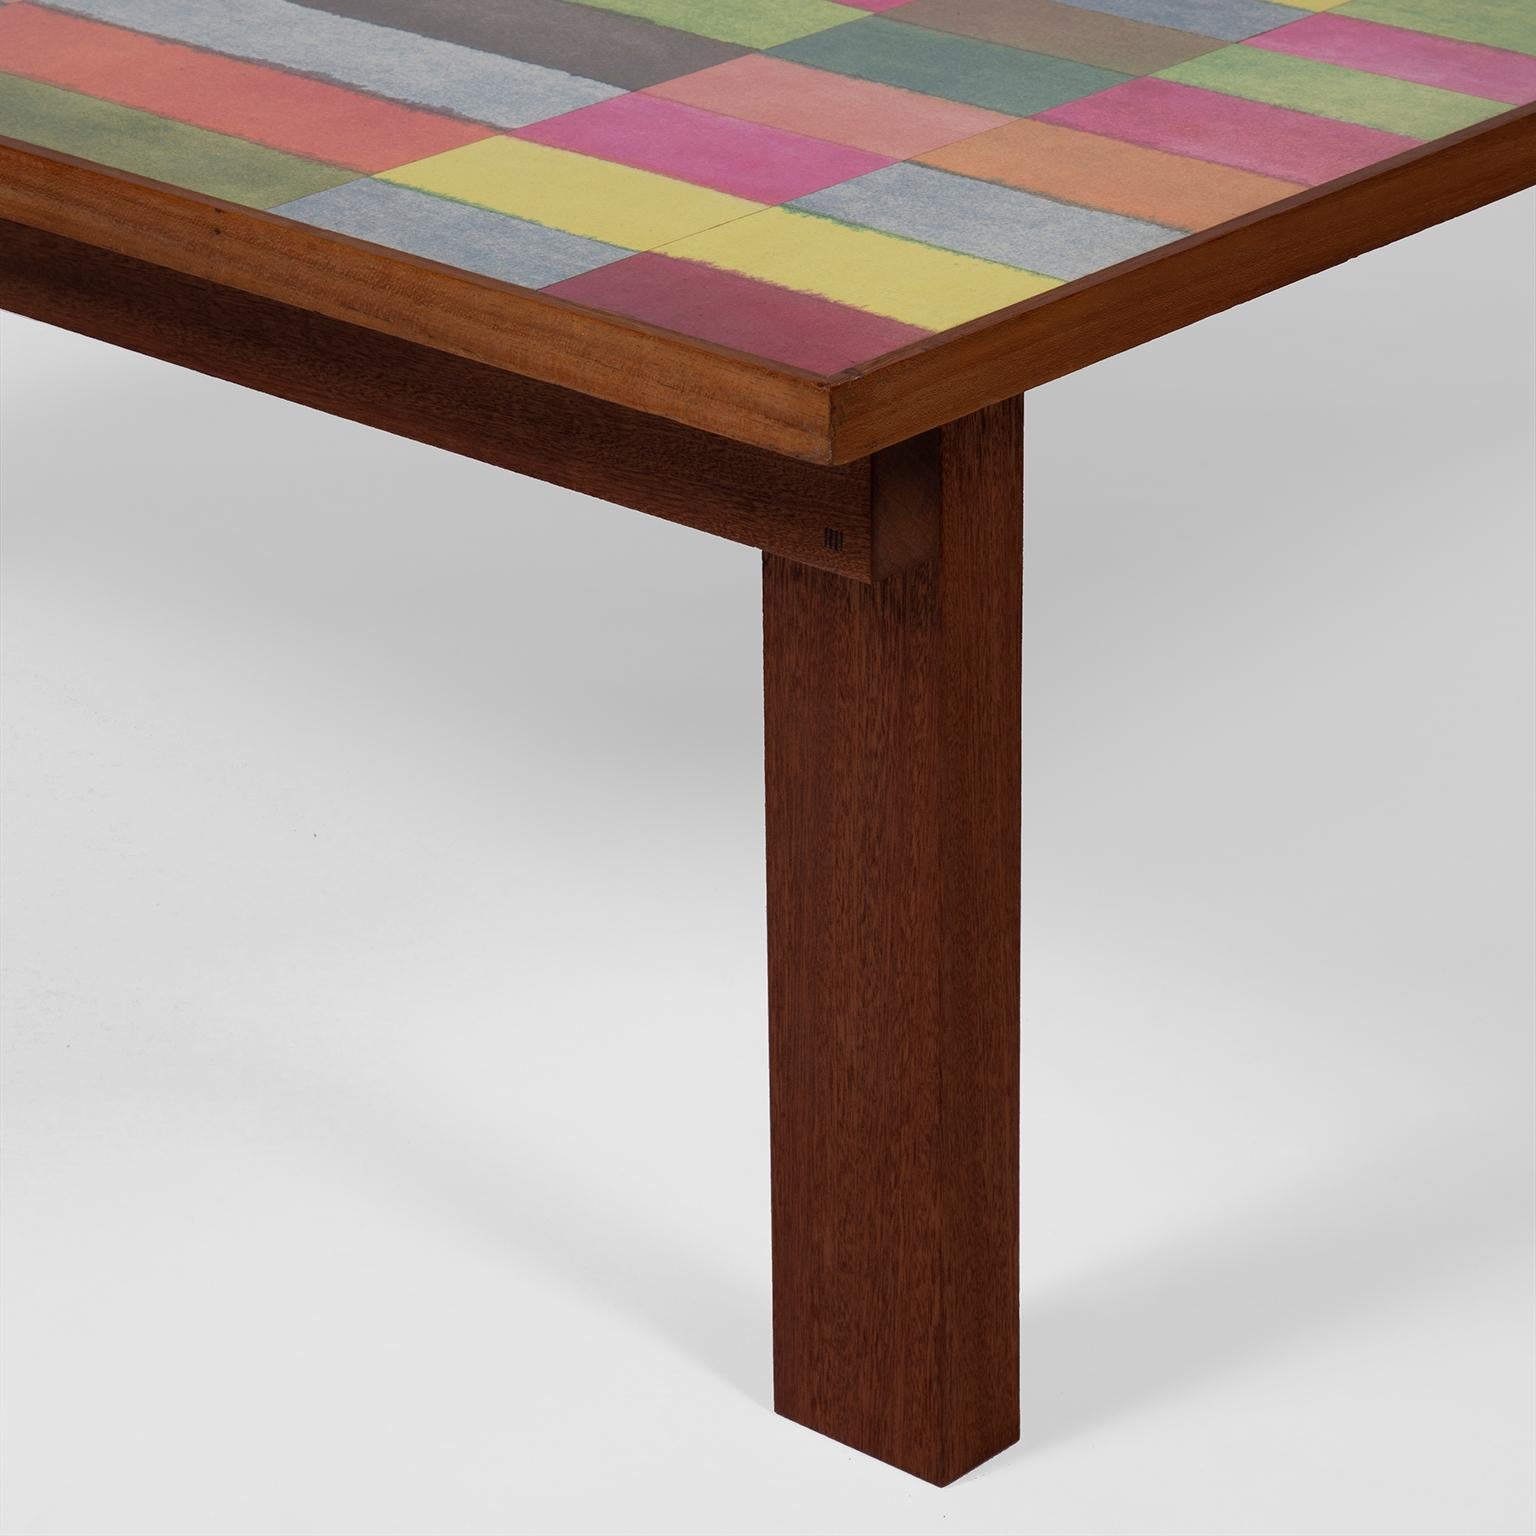 English Multicolour Rectangles Table by DANAD Design 'Barry Daniels' For Sale